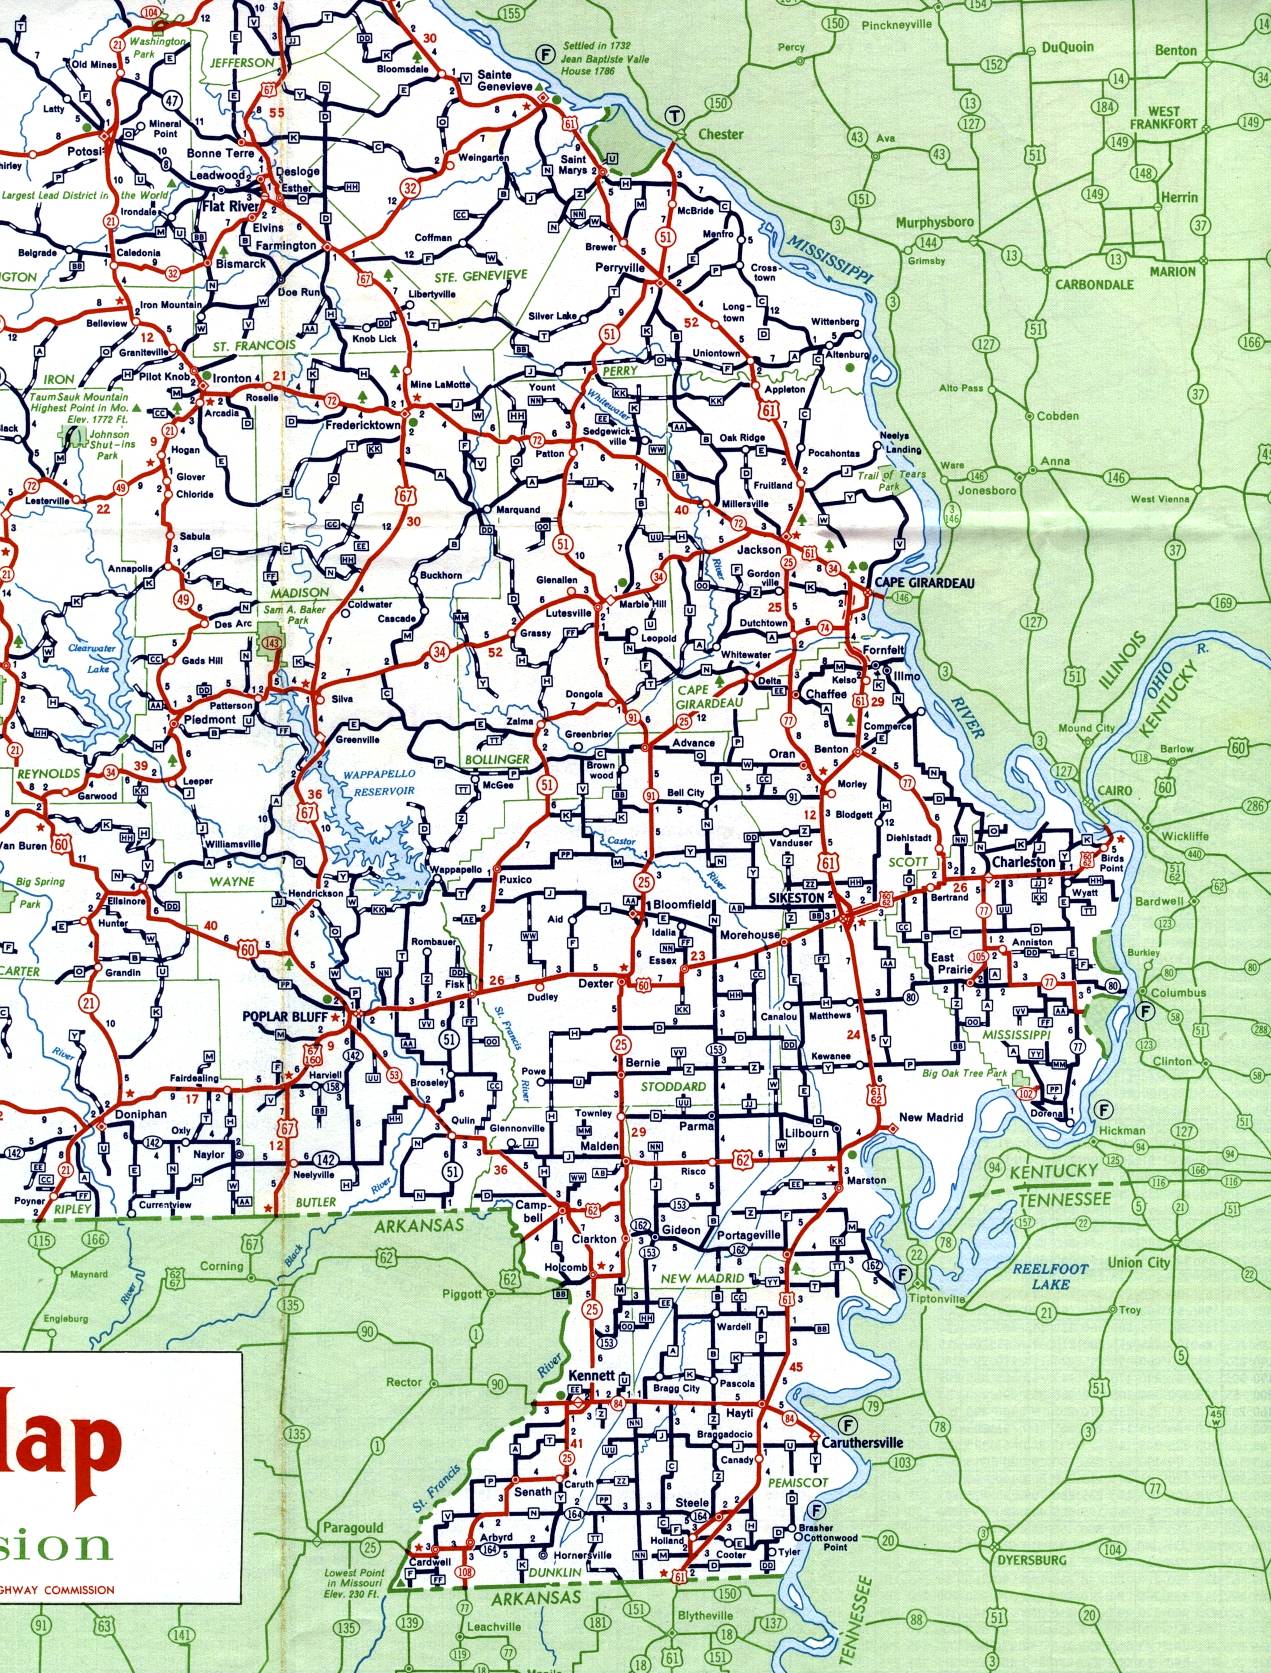 Bootheel section of Missouri from 1959 official highway map